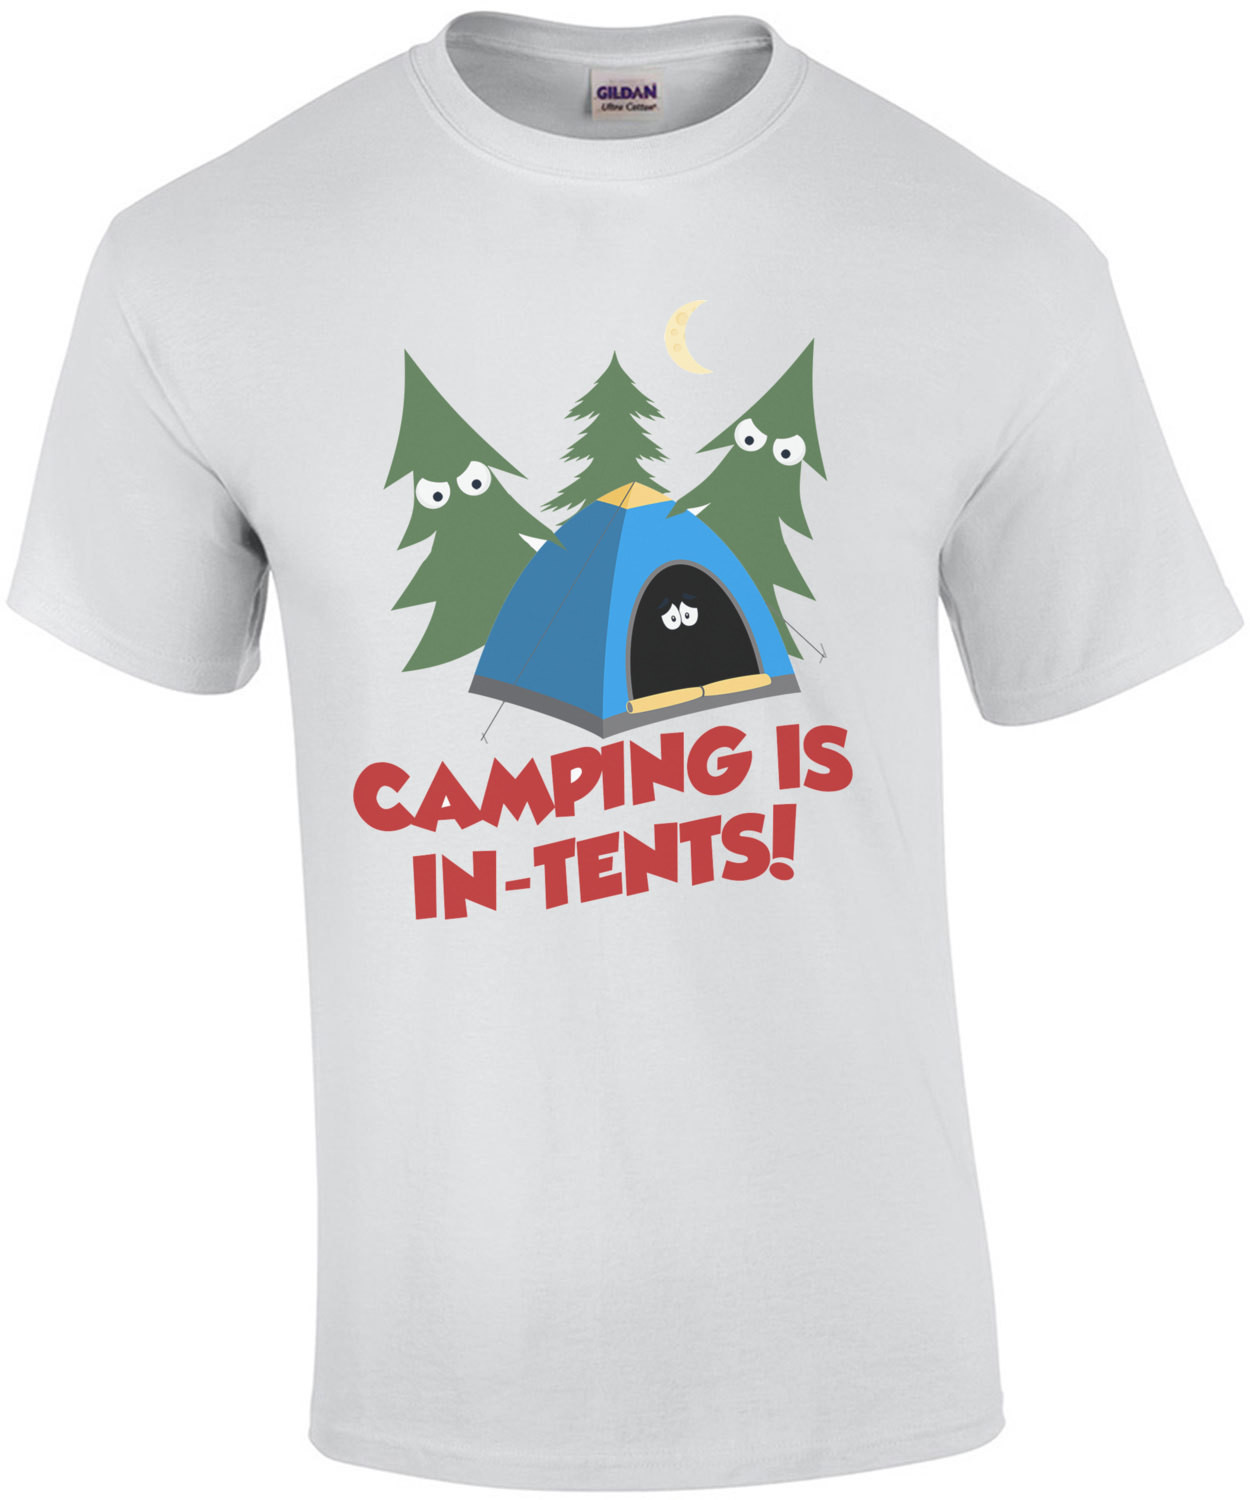 Camping Is In Tents. Funny Pun T-Shirt